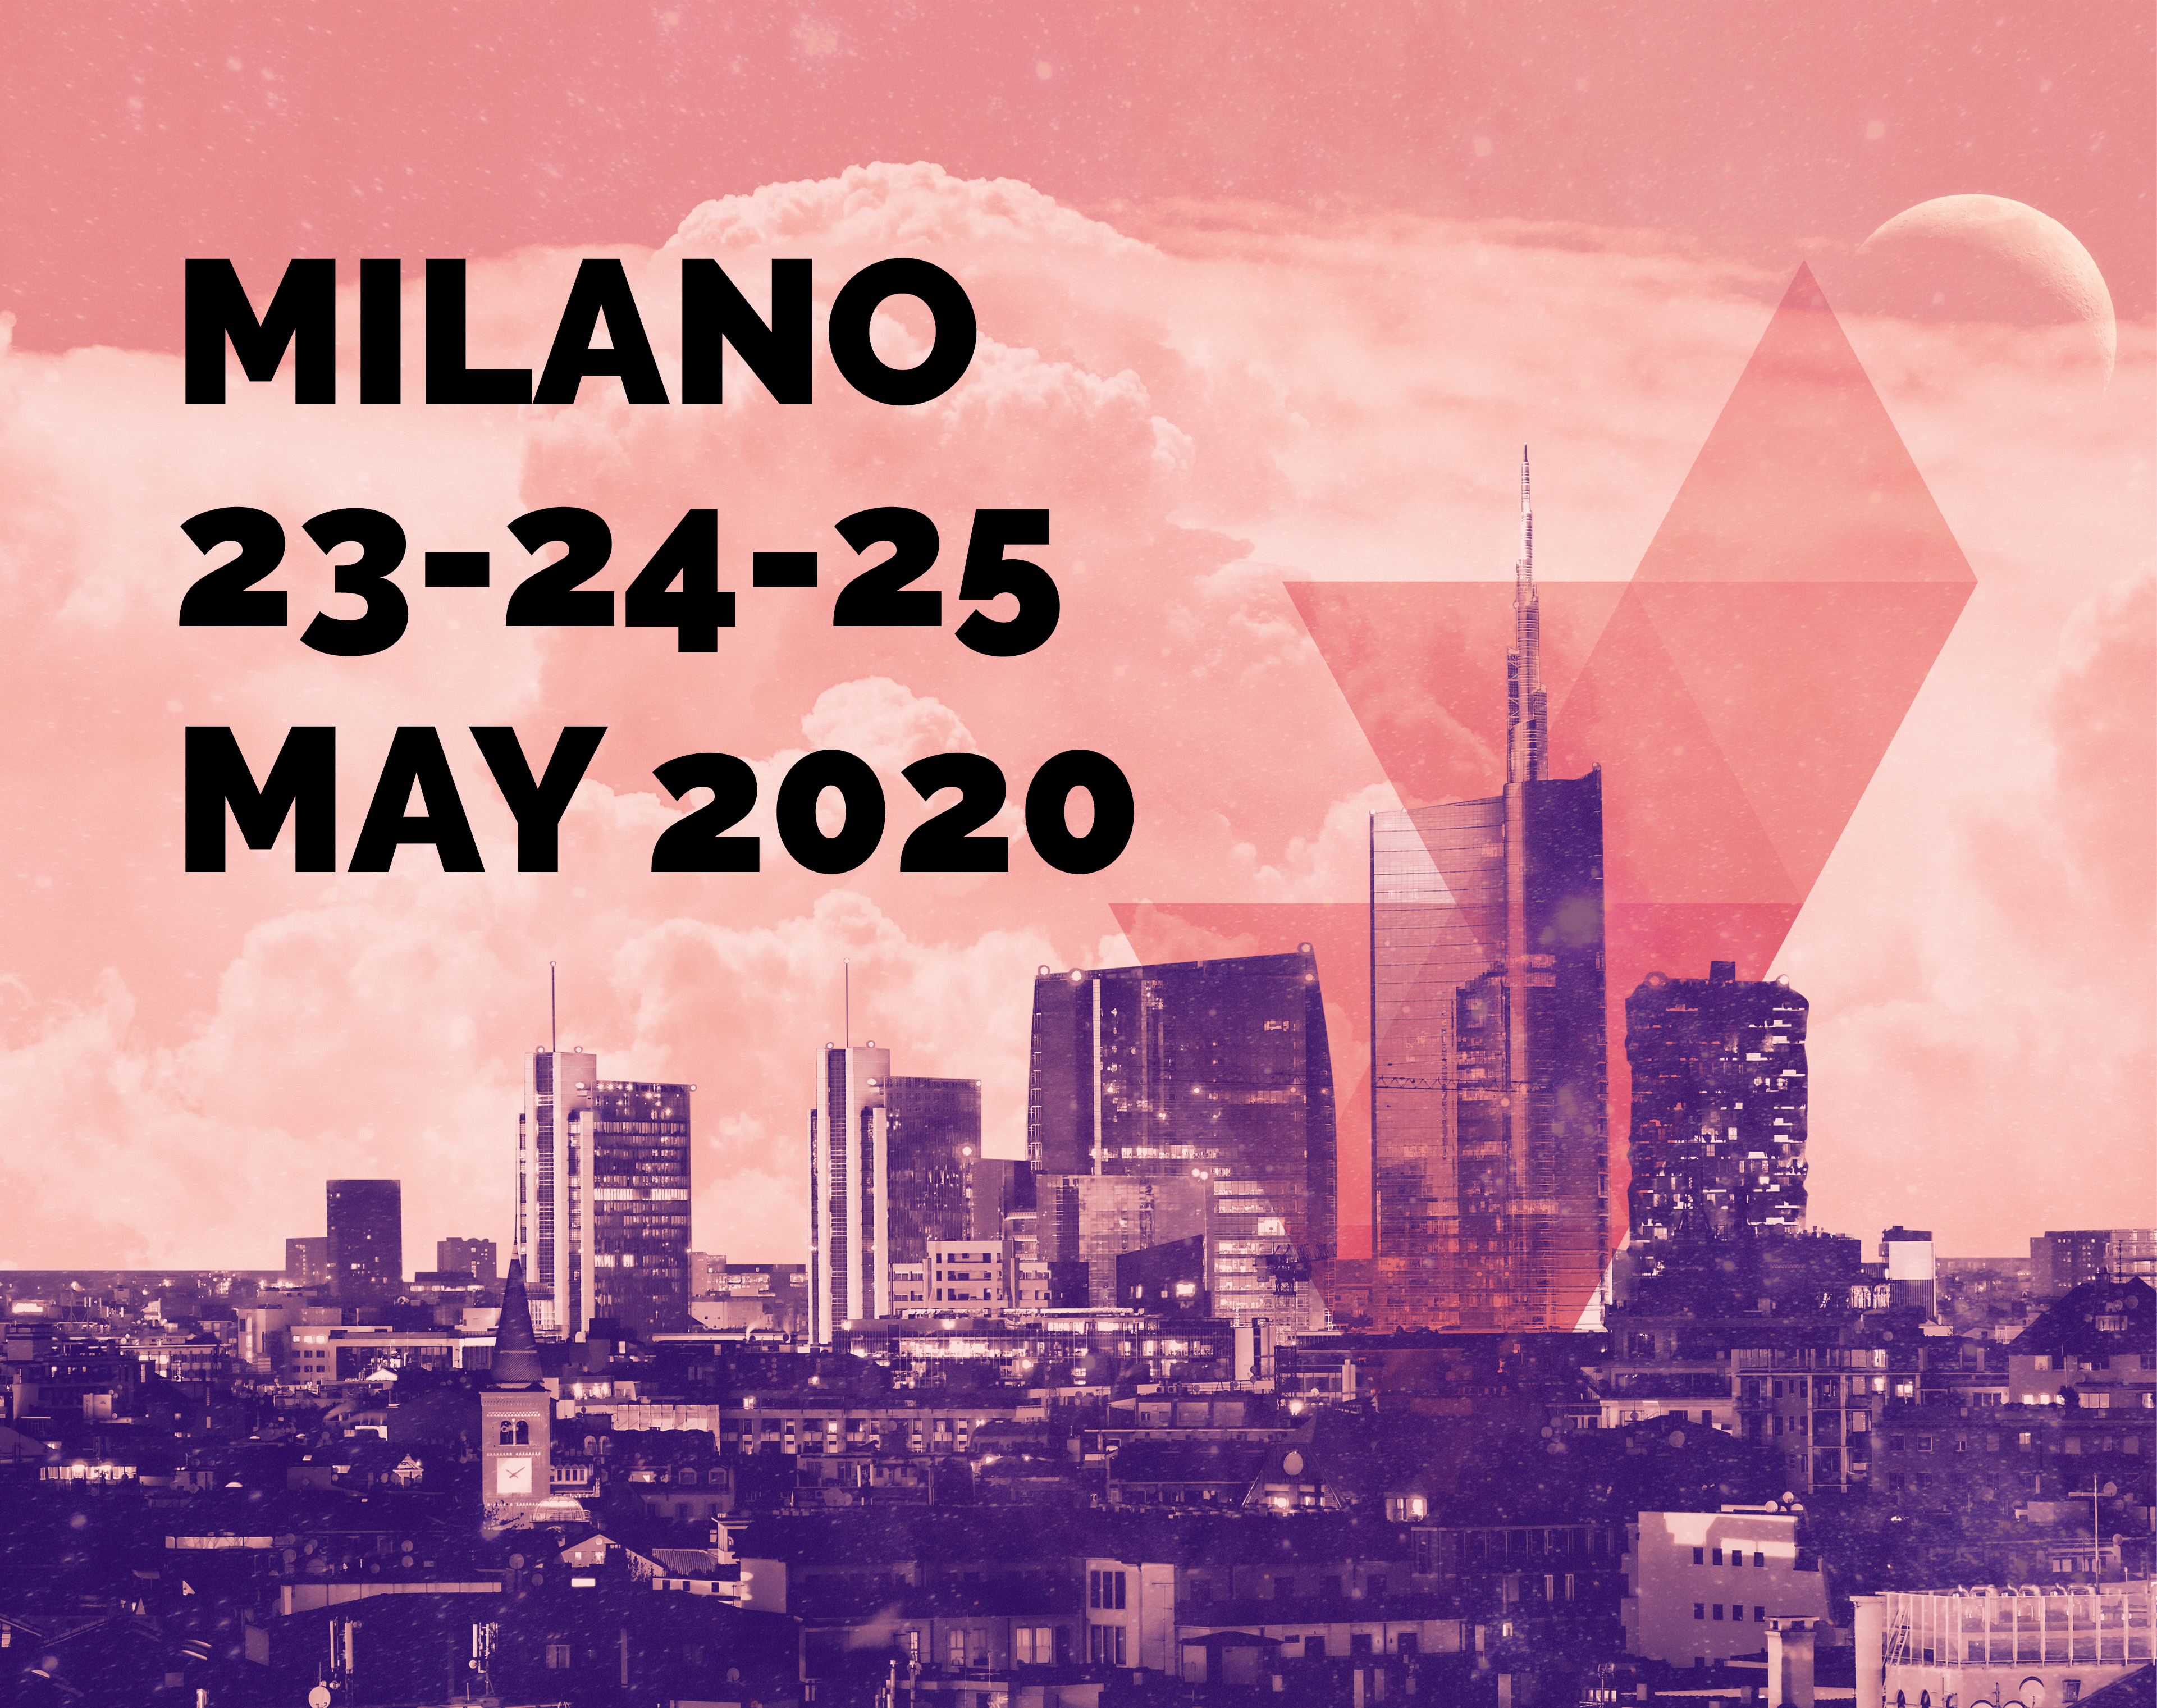 Vapitaly 2020 grows: new edition at fieramilano for the international trade fair of vaping and electronic cigarettes